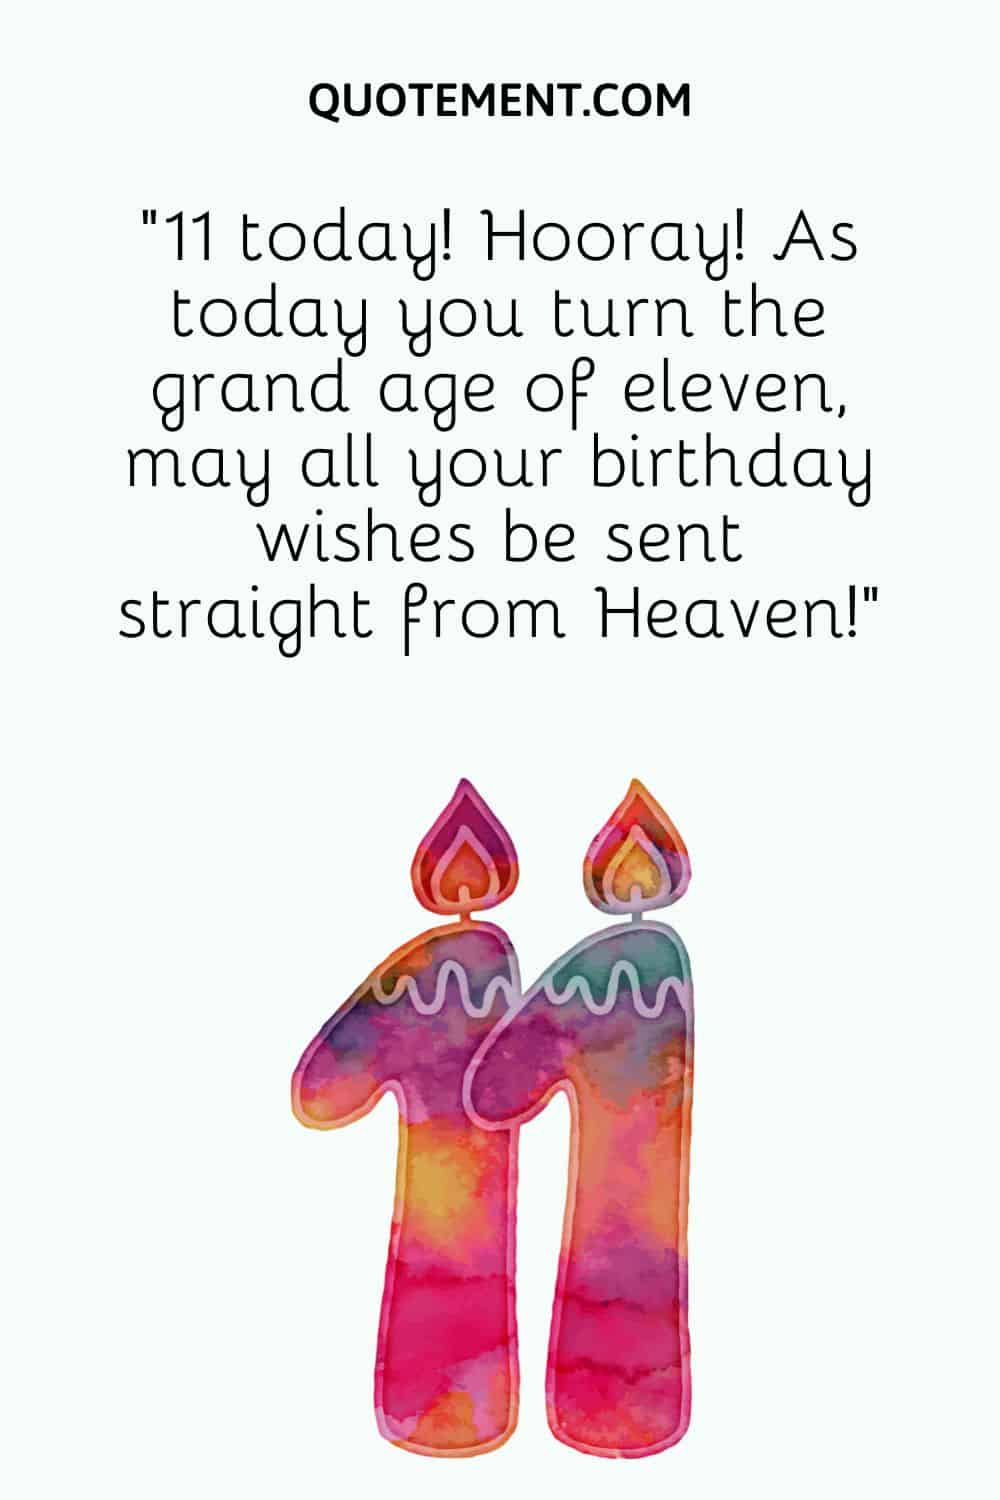 “11 today! Hooray! As today you turn the grand age of eleven, may all your birthday wishes be sent straight from Heaven!”